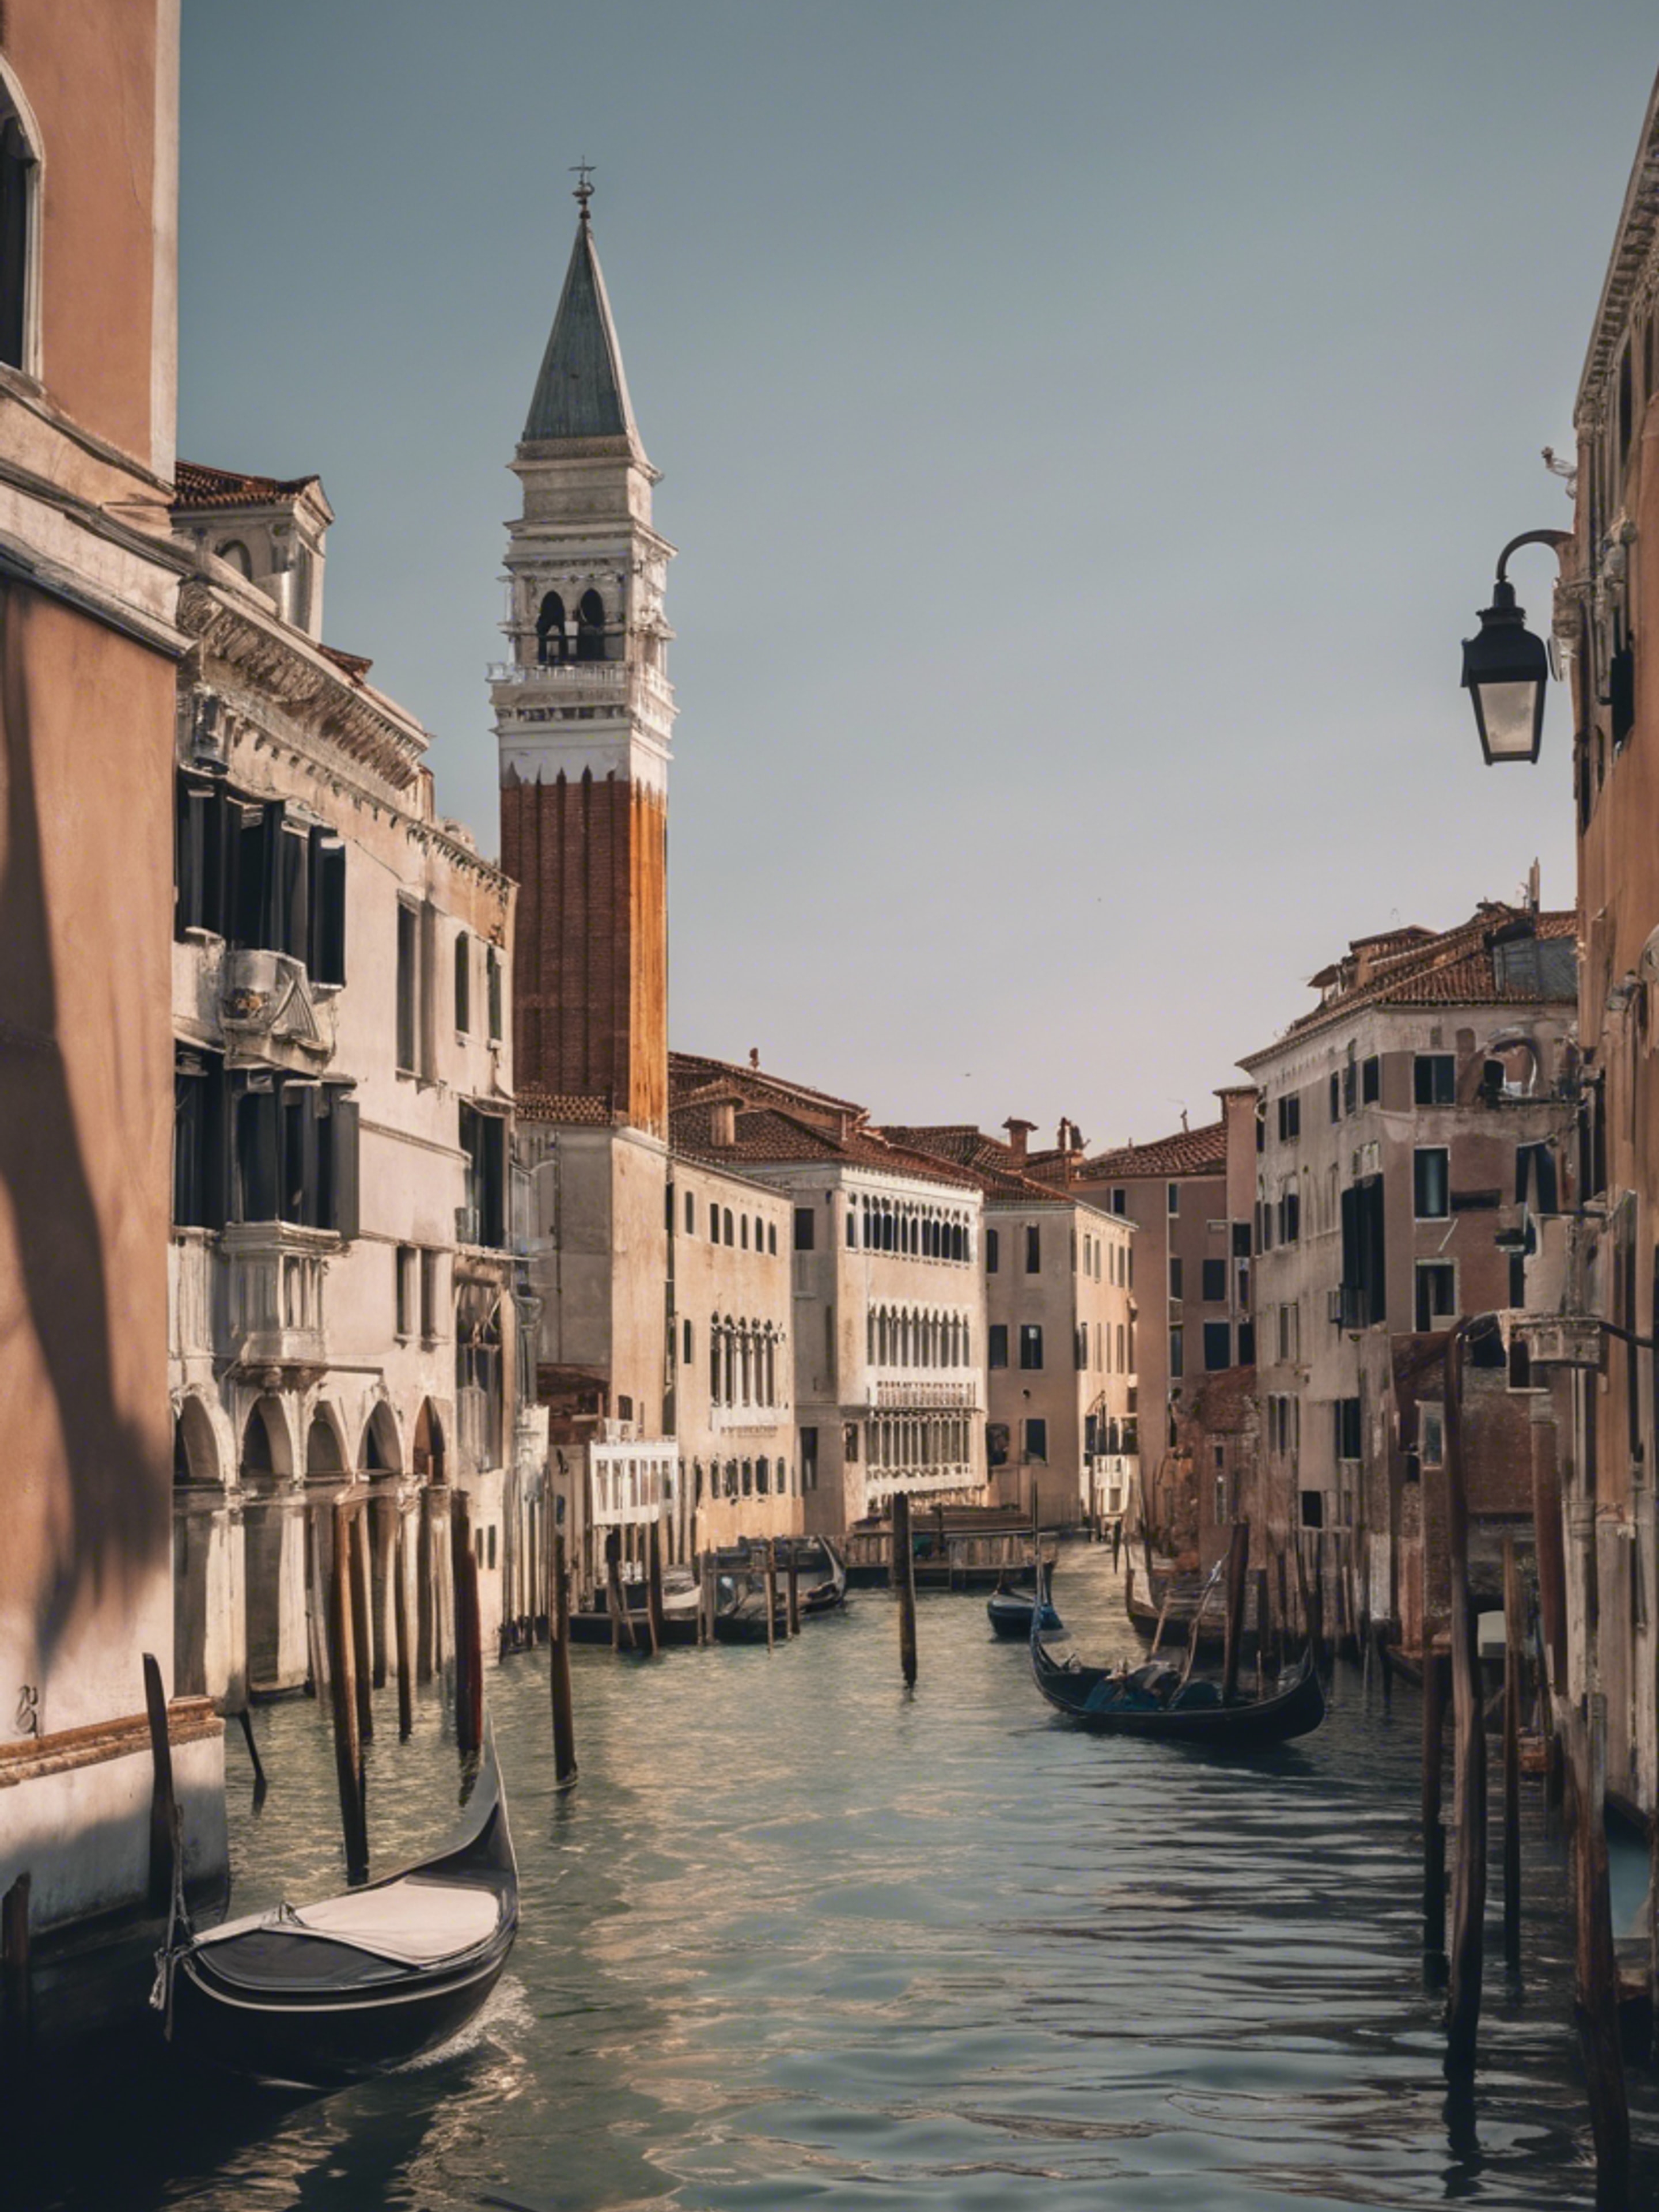 The enchanting skyline of Venice, showing the harmony of waterways and gothic architecture. Hintergrund[ea568ee278994e97af3a]